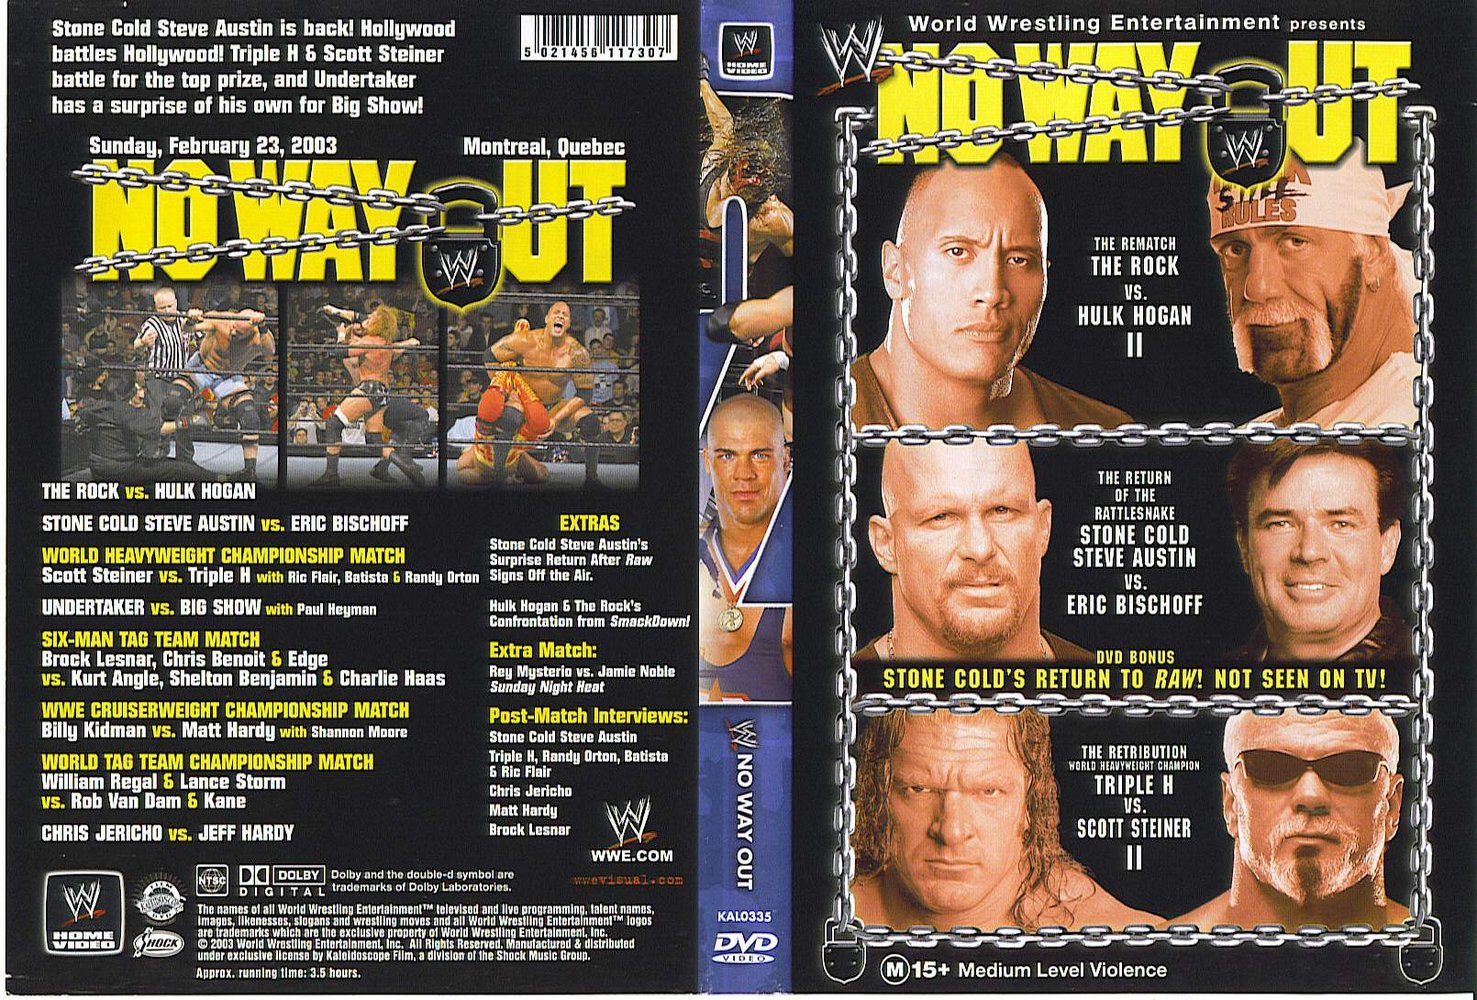 Jaquette DVD WWE No Way Out 2003